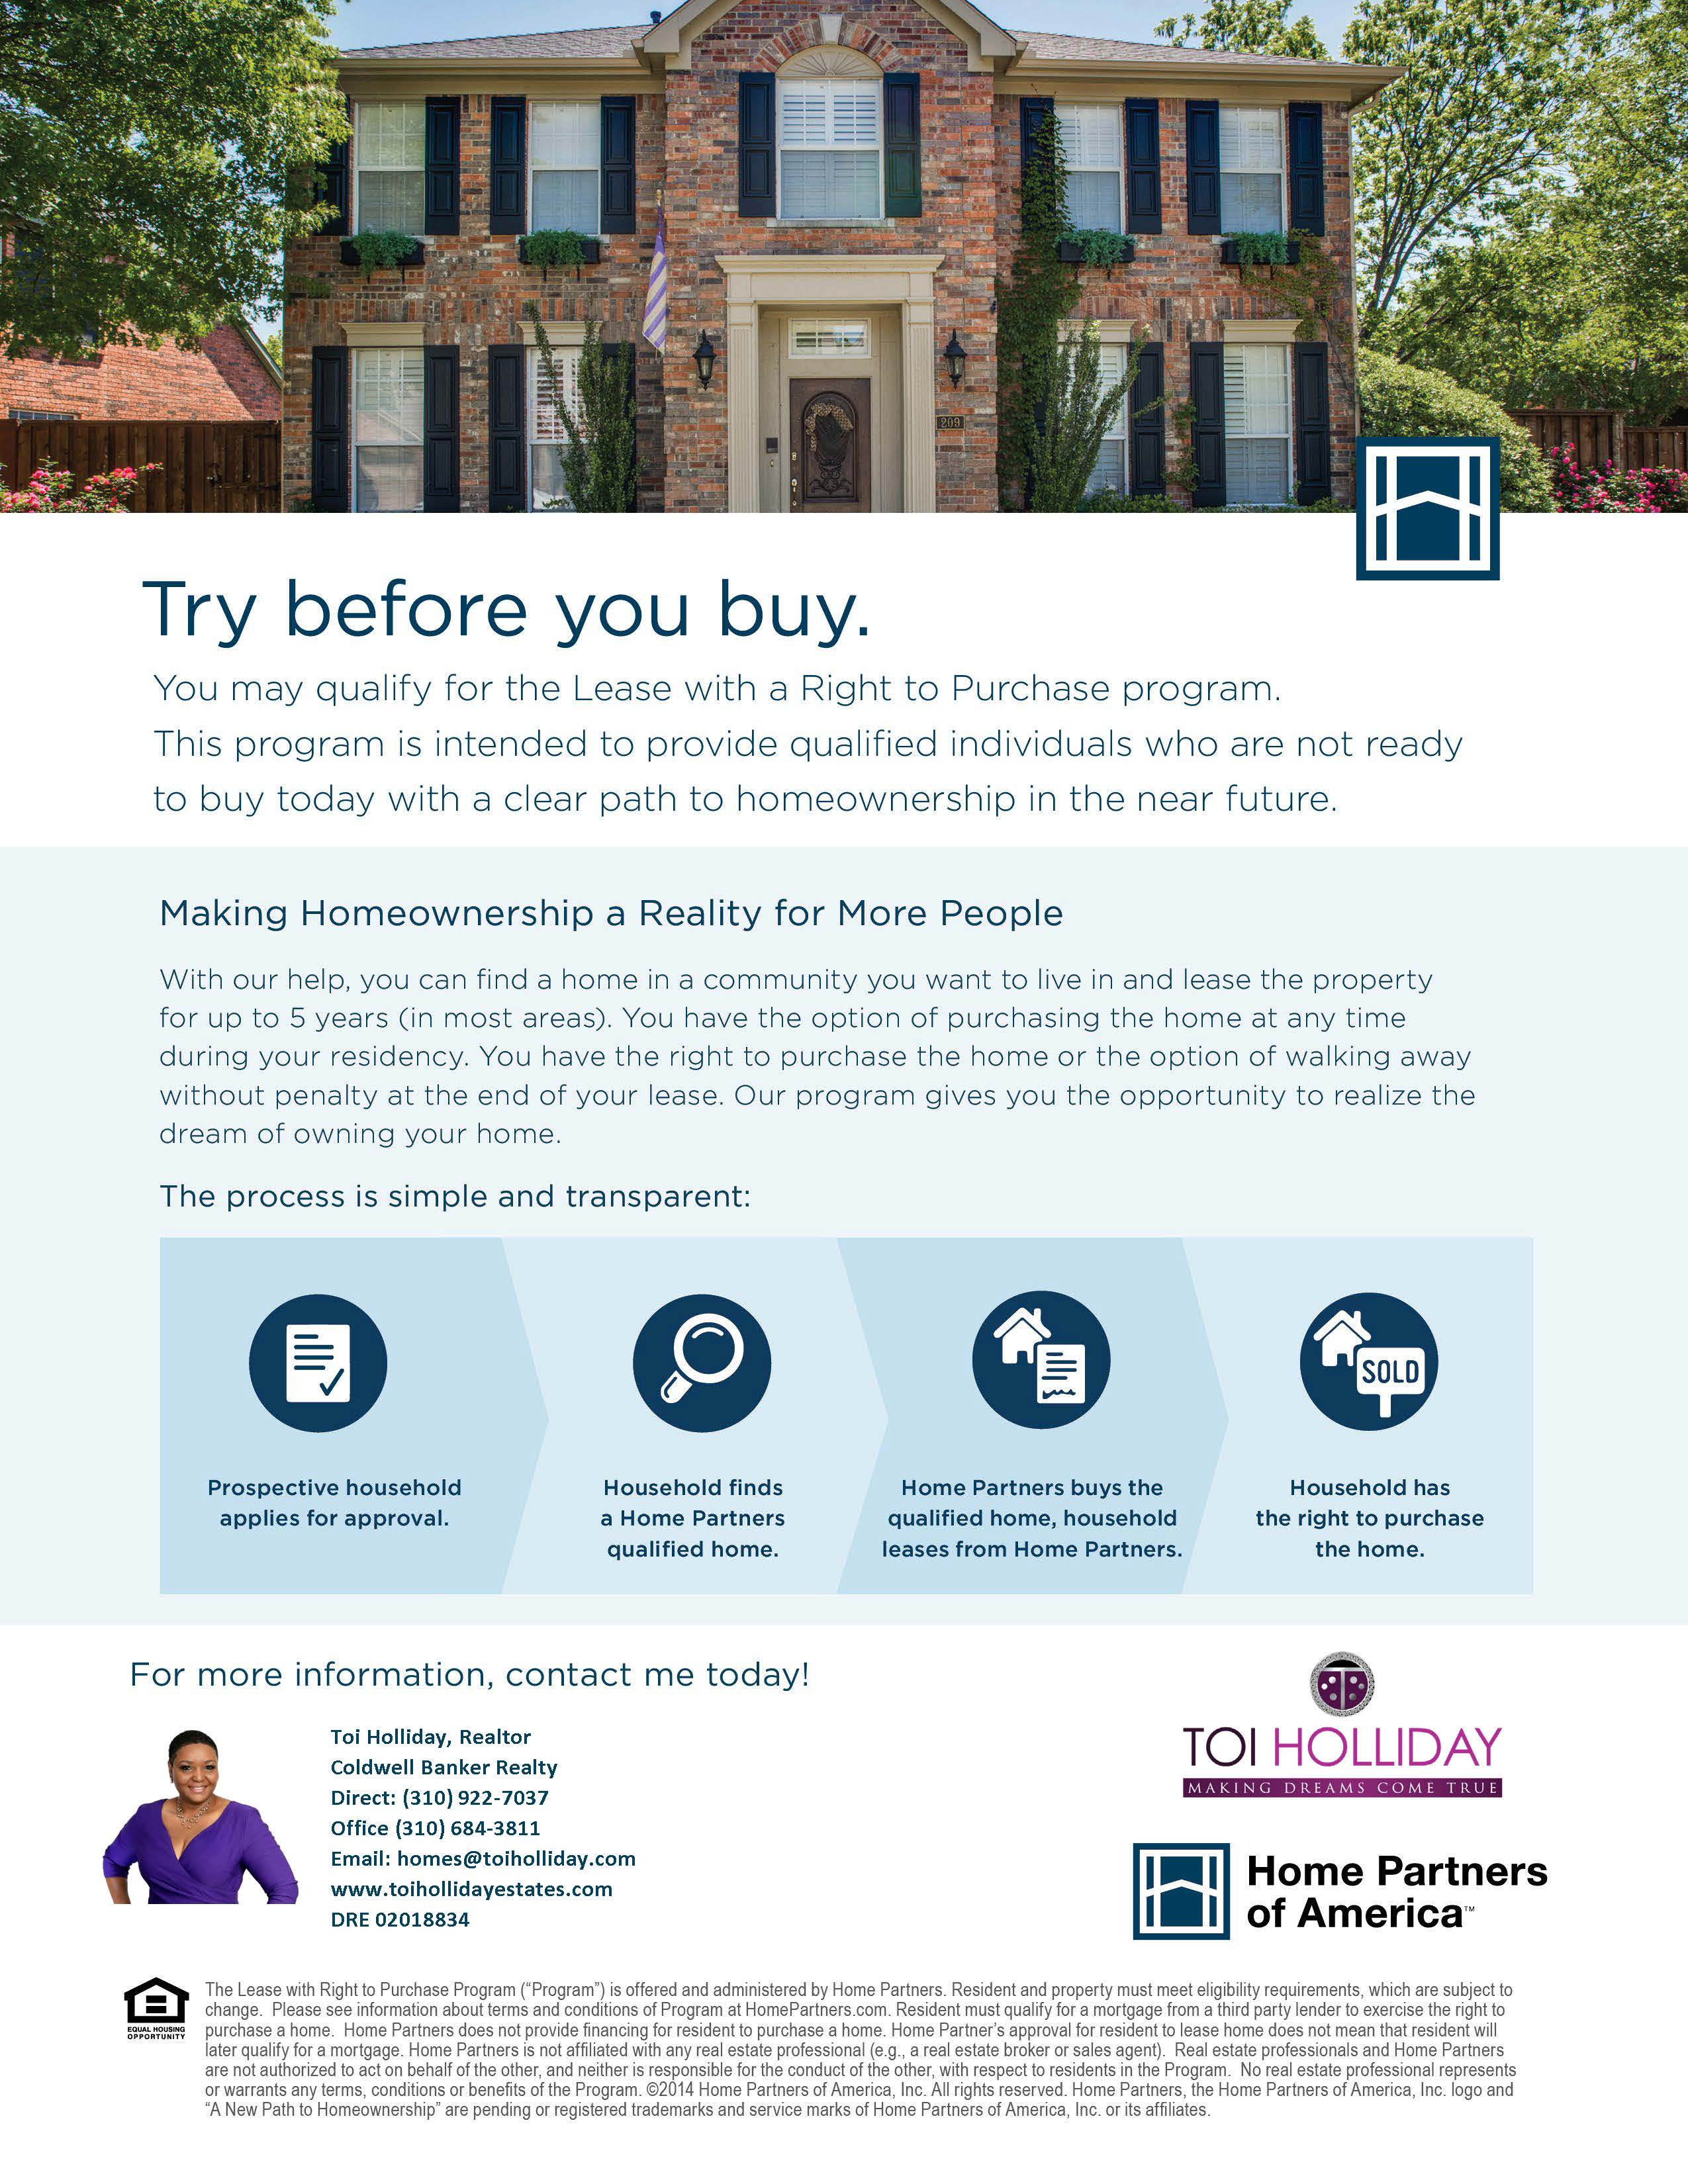 Try before you buy - Toi Holliday - Lease Purchase Program_Page_1.jpg